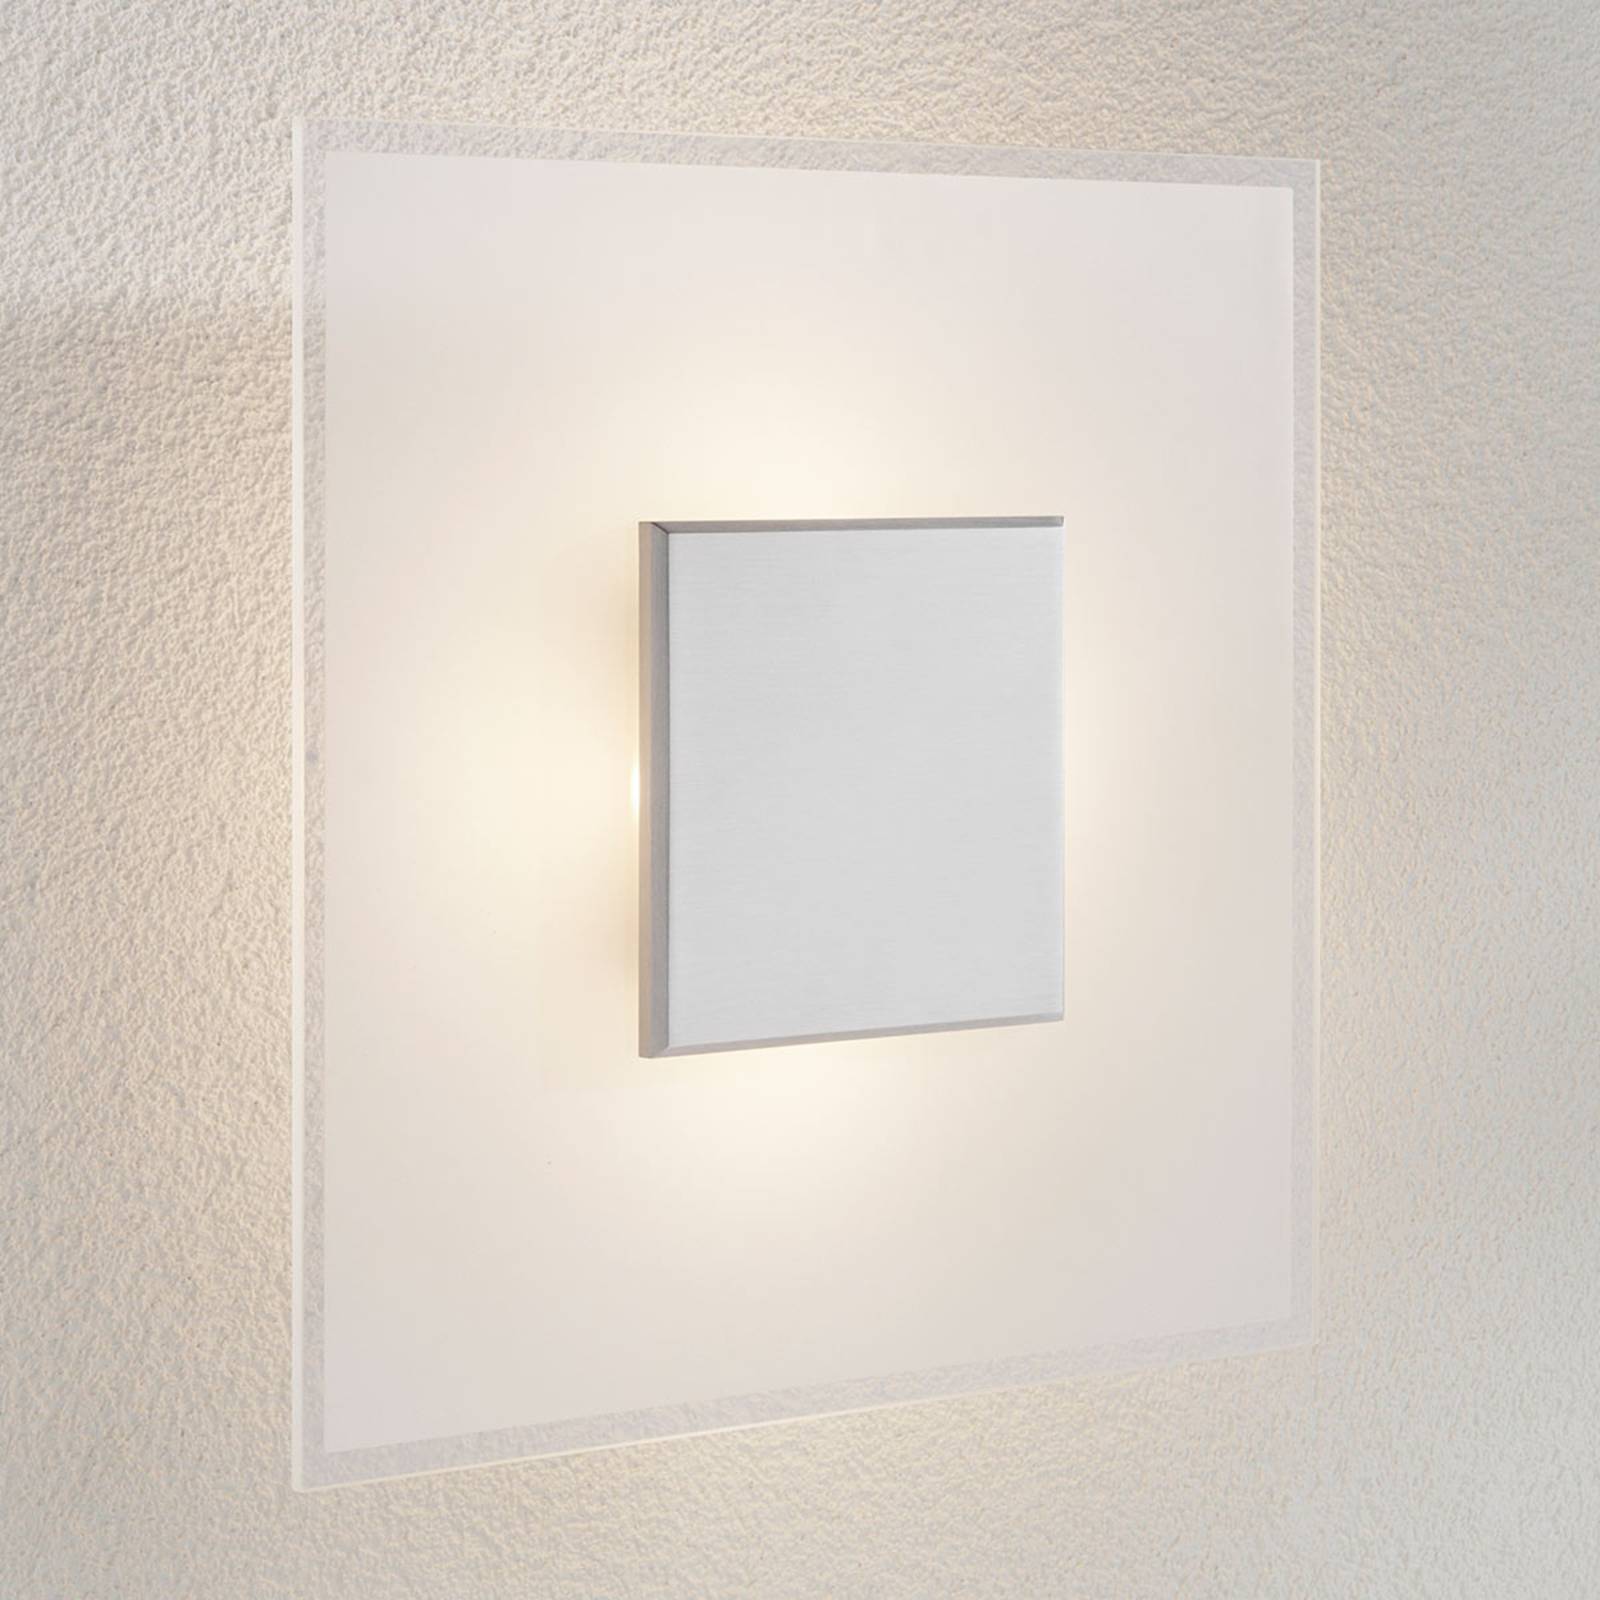 Rothfels Lole applique LED, alu, 38 cm, dimmable